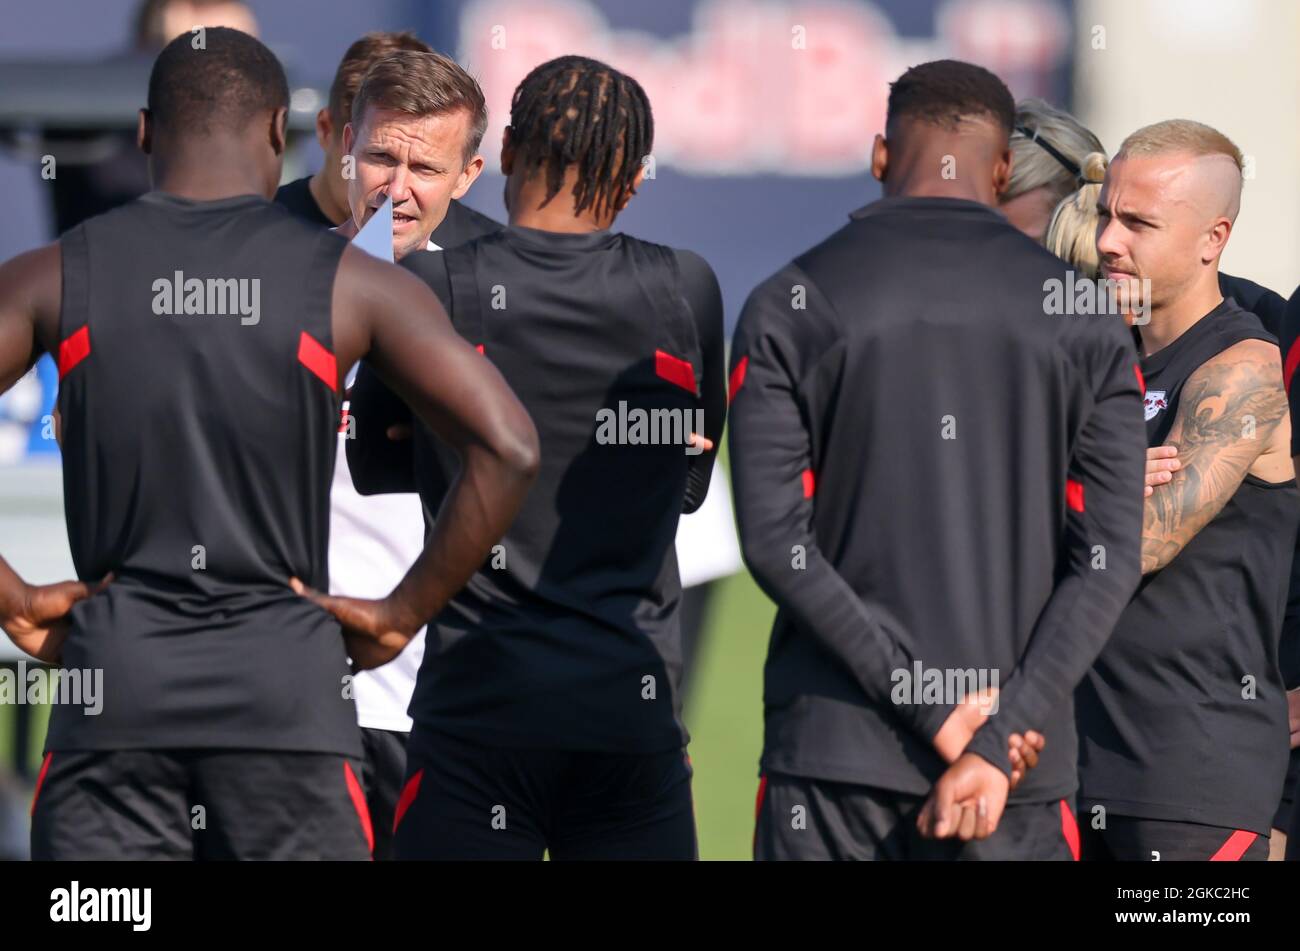 Leipzig, Germany. 14th Sep, 2021. Football: Champions League, group stage,  final training before the group match RB Leipzig - Manchester City at the  Red Bull Academy. Leipzig coach Jesse Marsch (2nd from